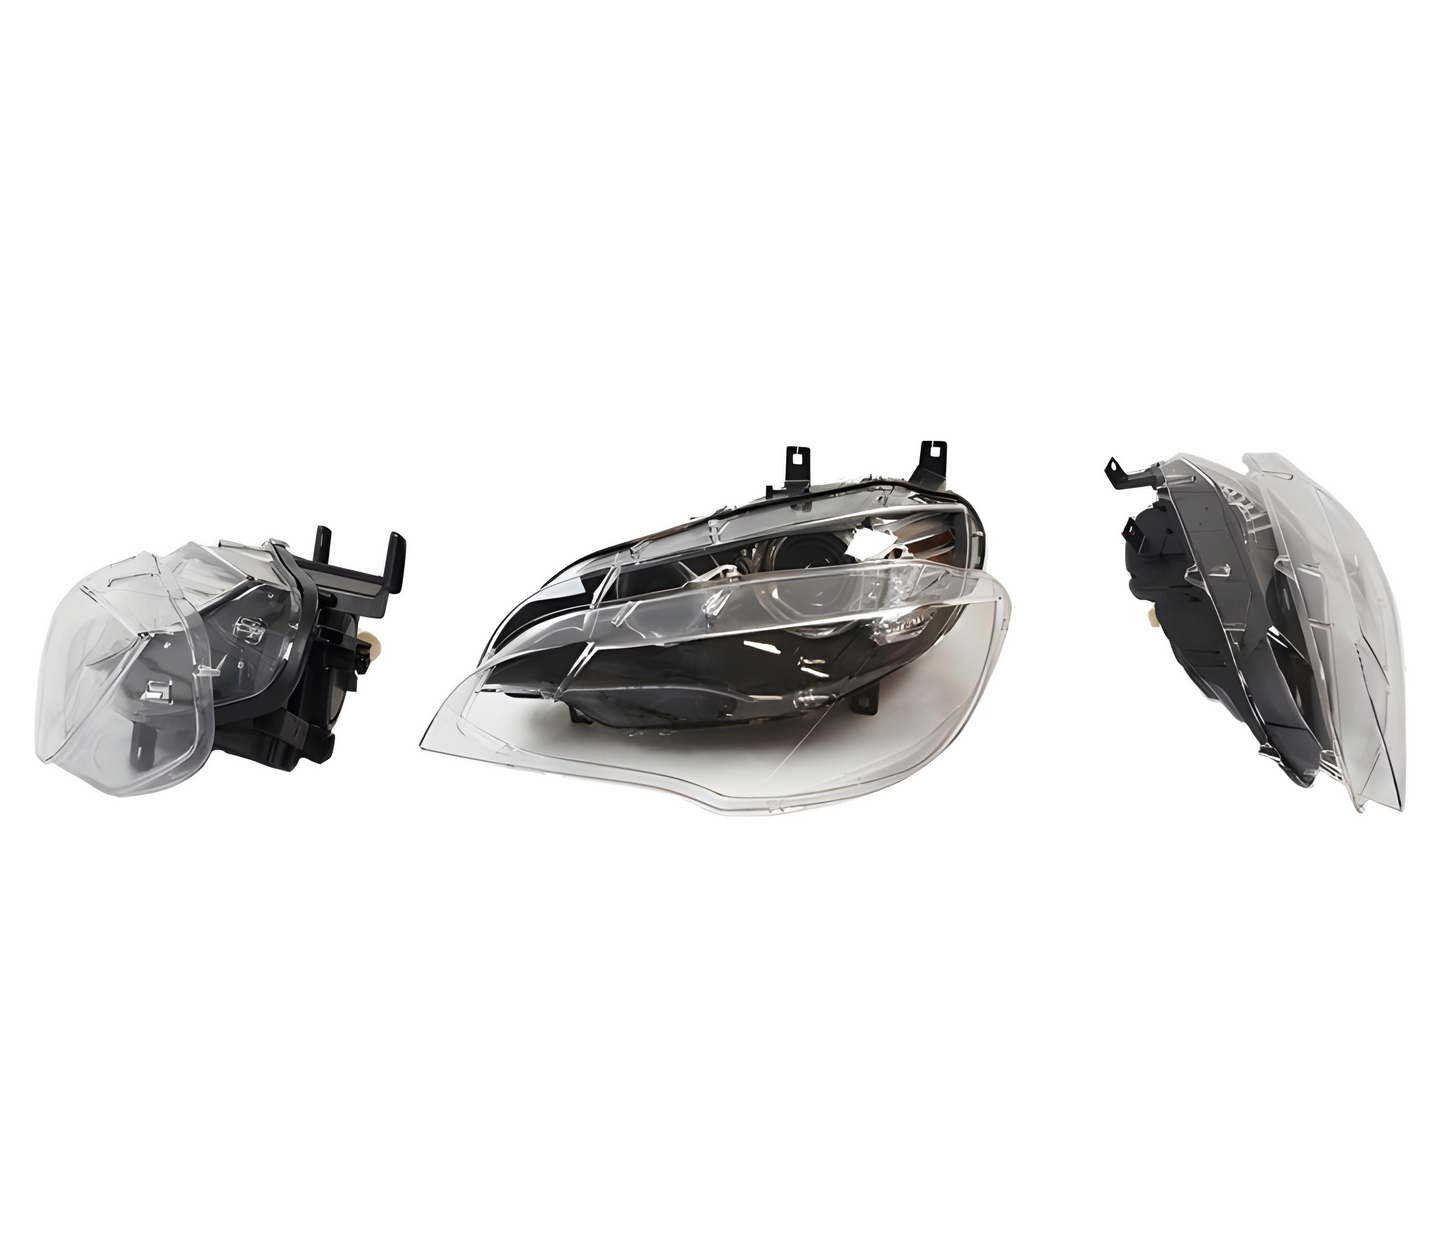 Headlight Lens covers for BMW X3 F25 (2009-2014)